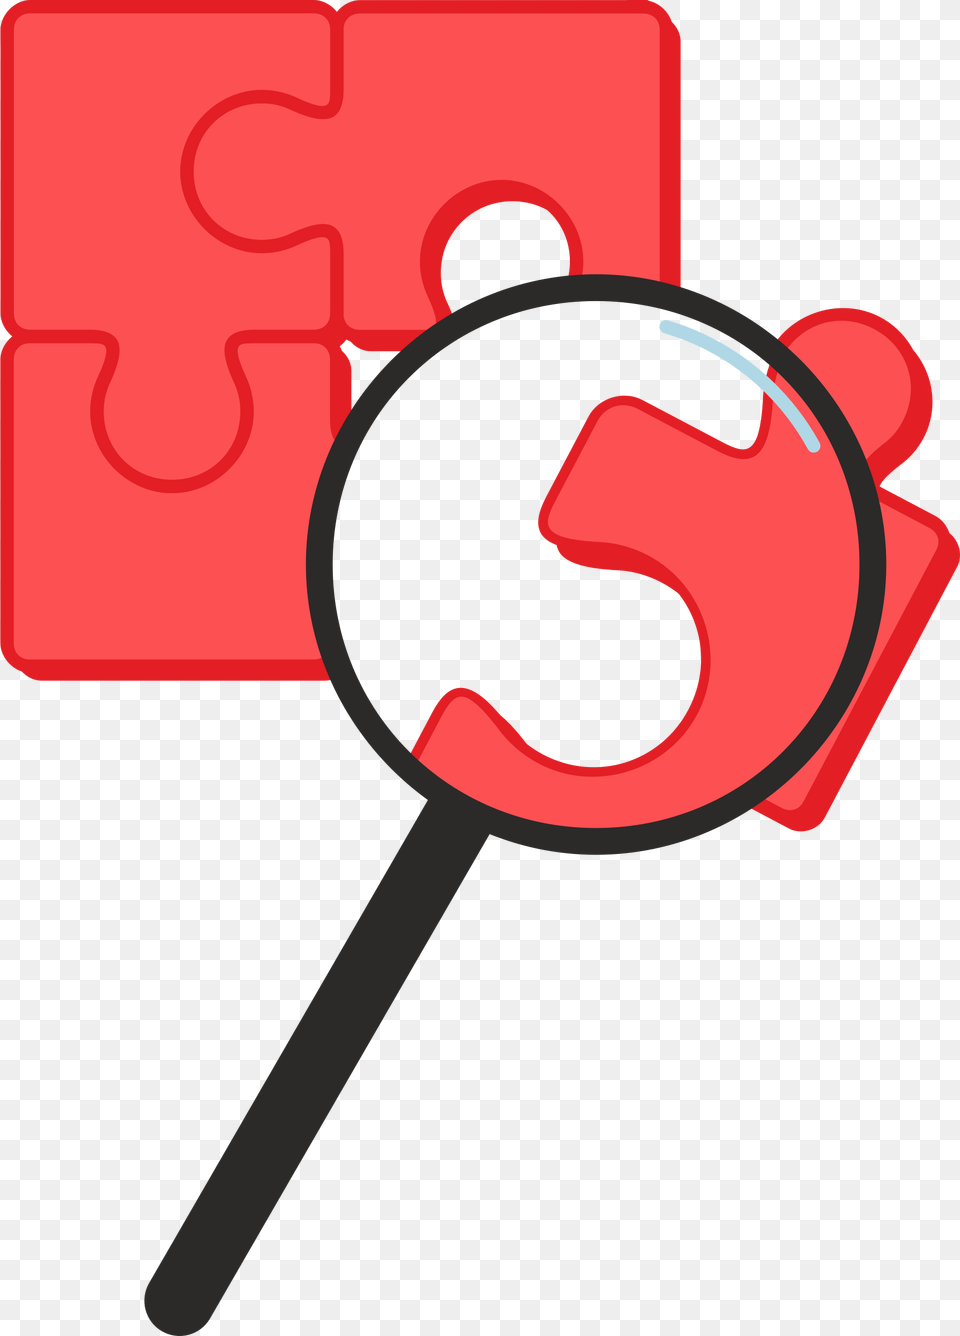 Puzzle Pieces With Big Image Magnifying Glass Puzzle Piece, Food, Sweets, Candy Free Png